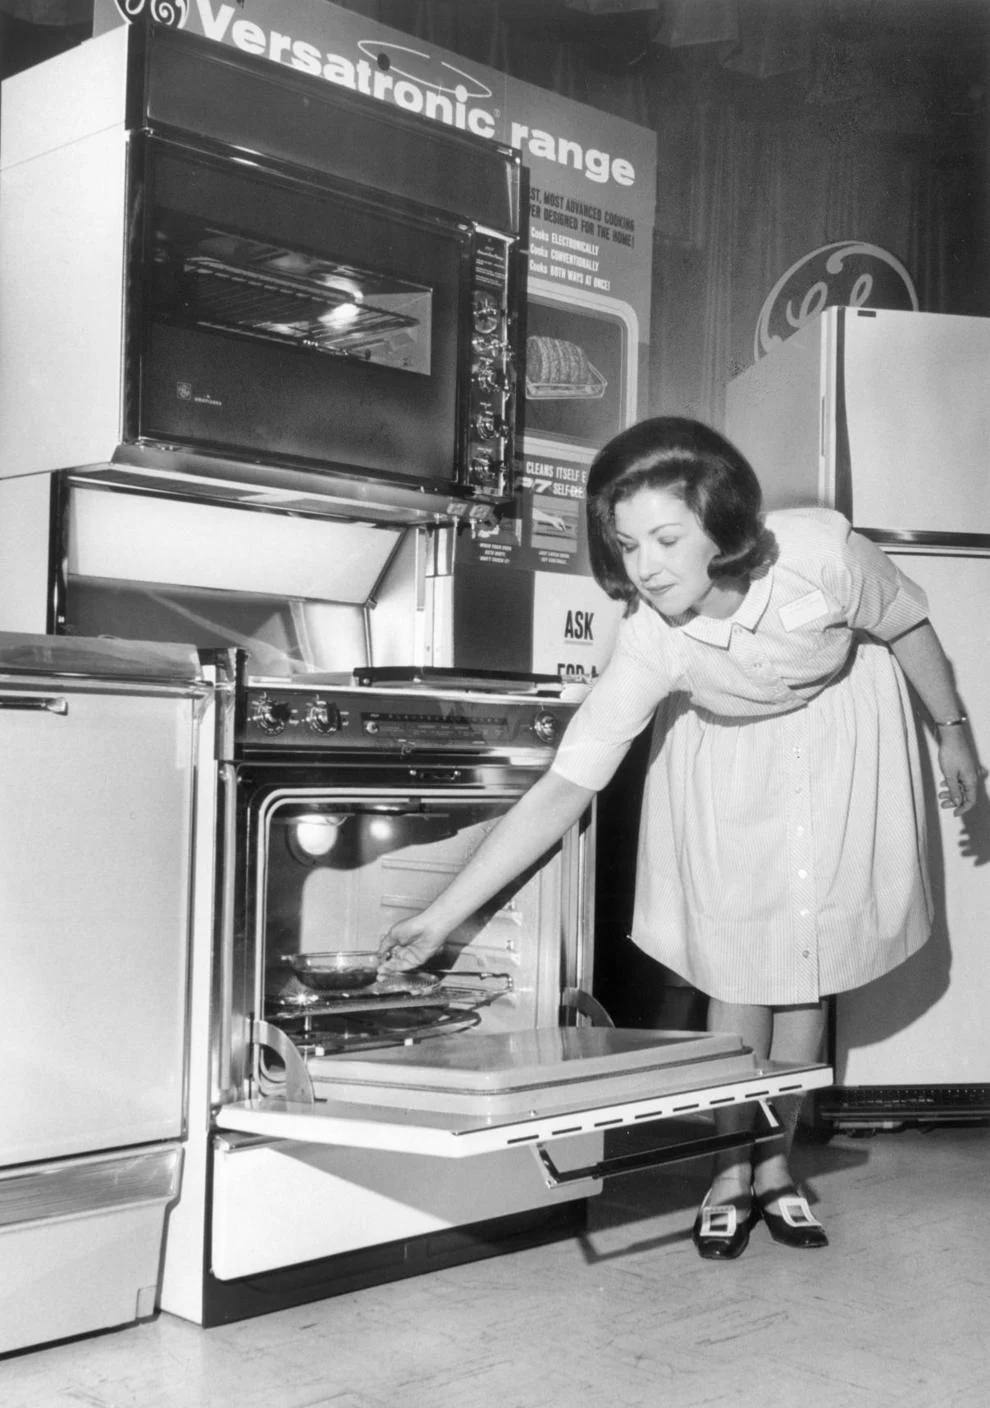 Rose Franklin highlighted the latest in General Electric kitchen innovations at a GE showroom in Richmond, 1968.